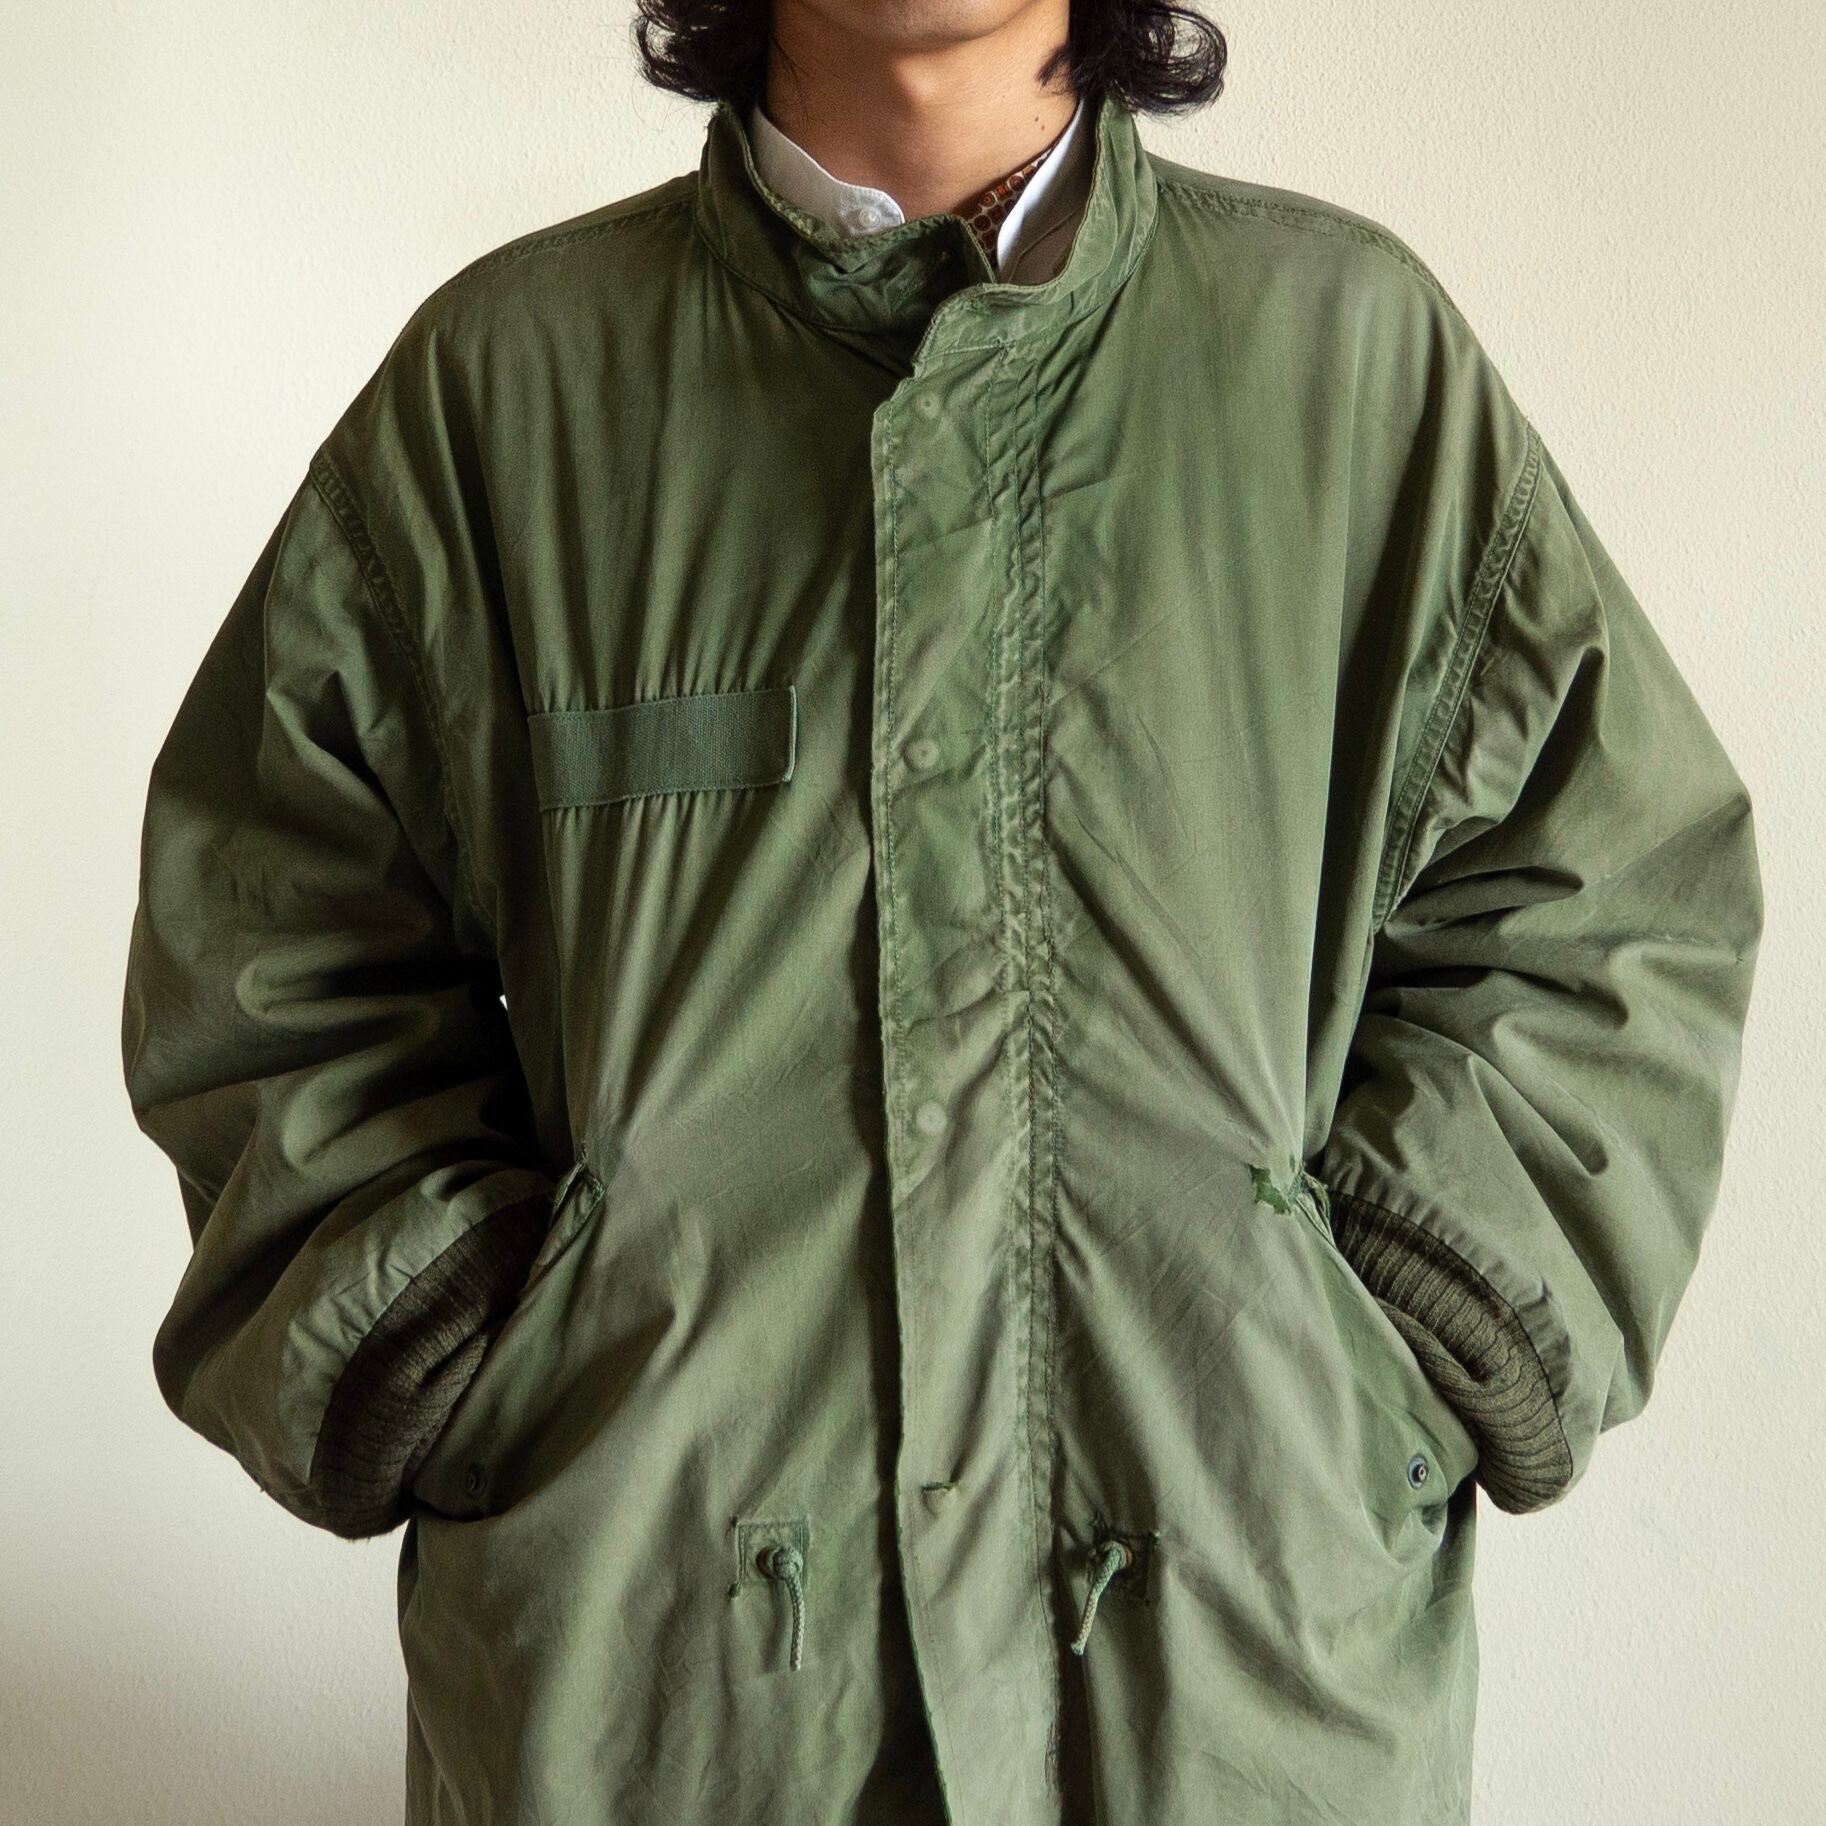 Customized M-65 Fishtail parka with Liner